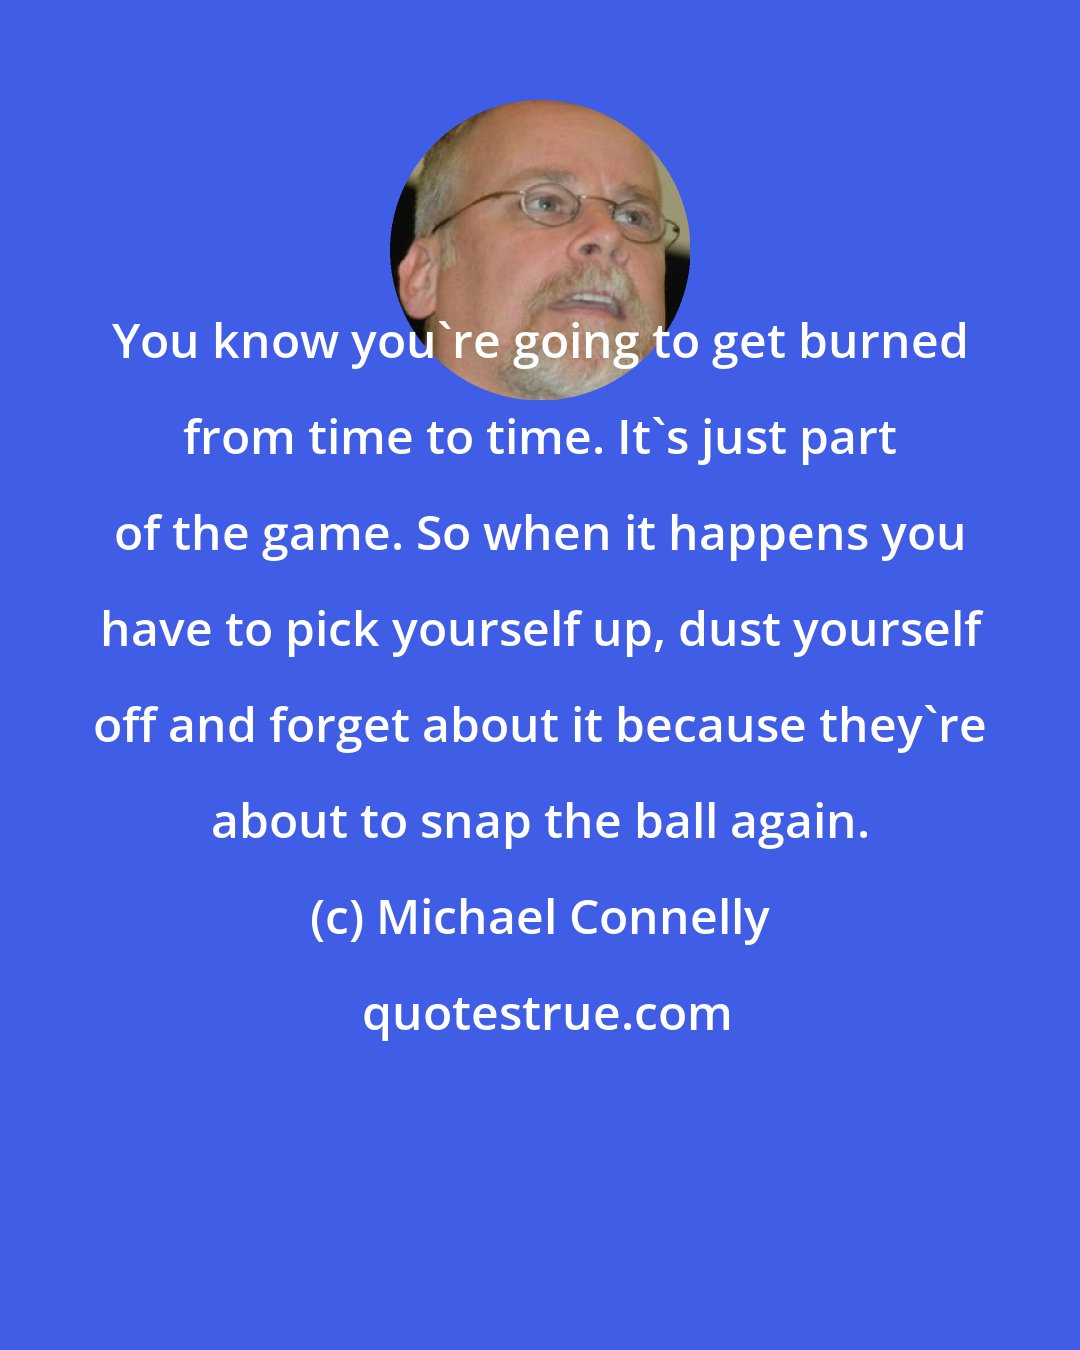 Michael Connelly: You know you're going to get burned from time to time. It's just part of the game. So when it happens you have to pick yourself up, dust yourself off and forget about it because they're about to snap the ball again.